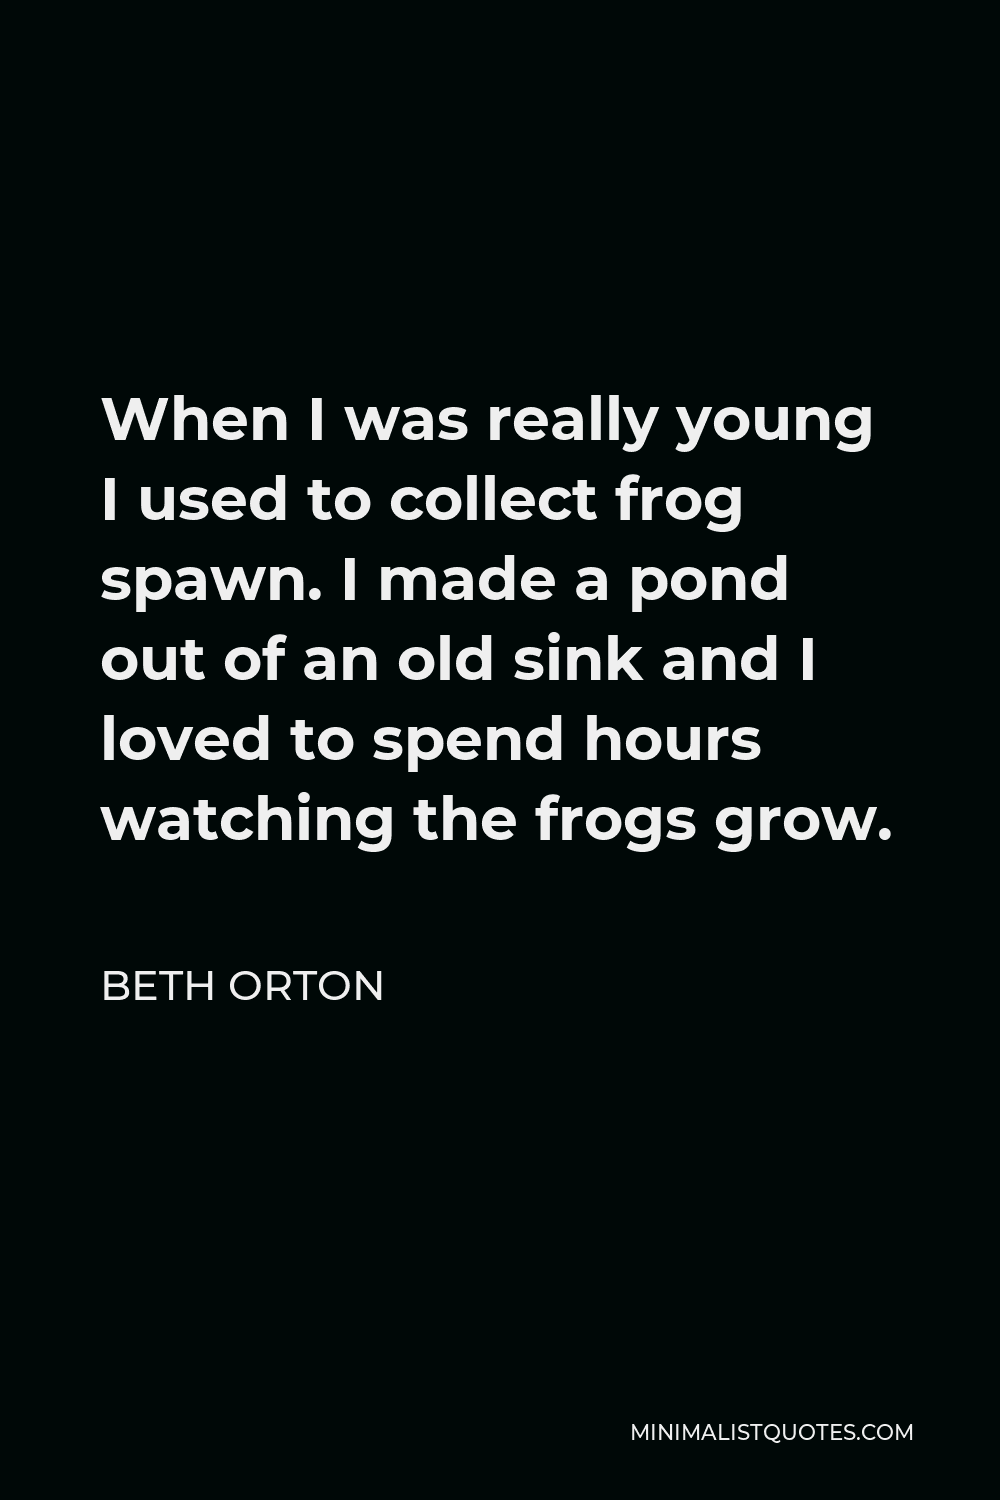 Beth Orton Quote - When I was really young I used to collect frog spawn. I made a pond out of an old sink and I loved to spend hours watching the frogs grow.